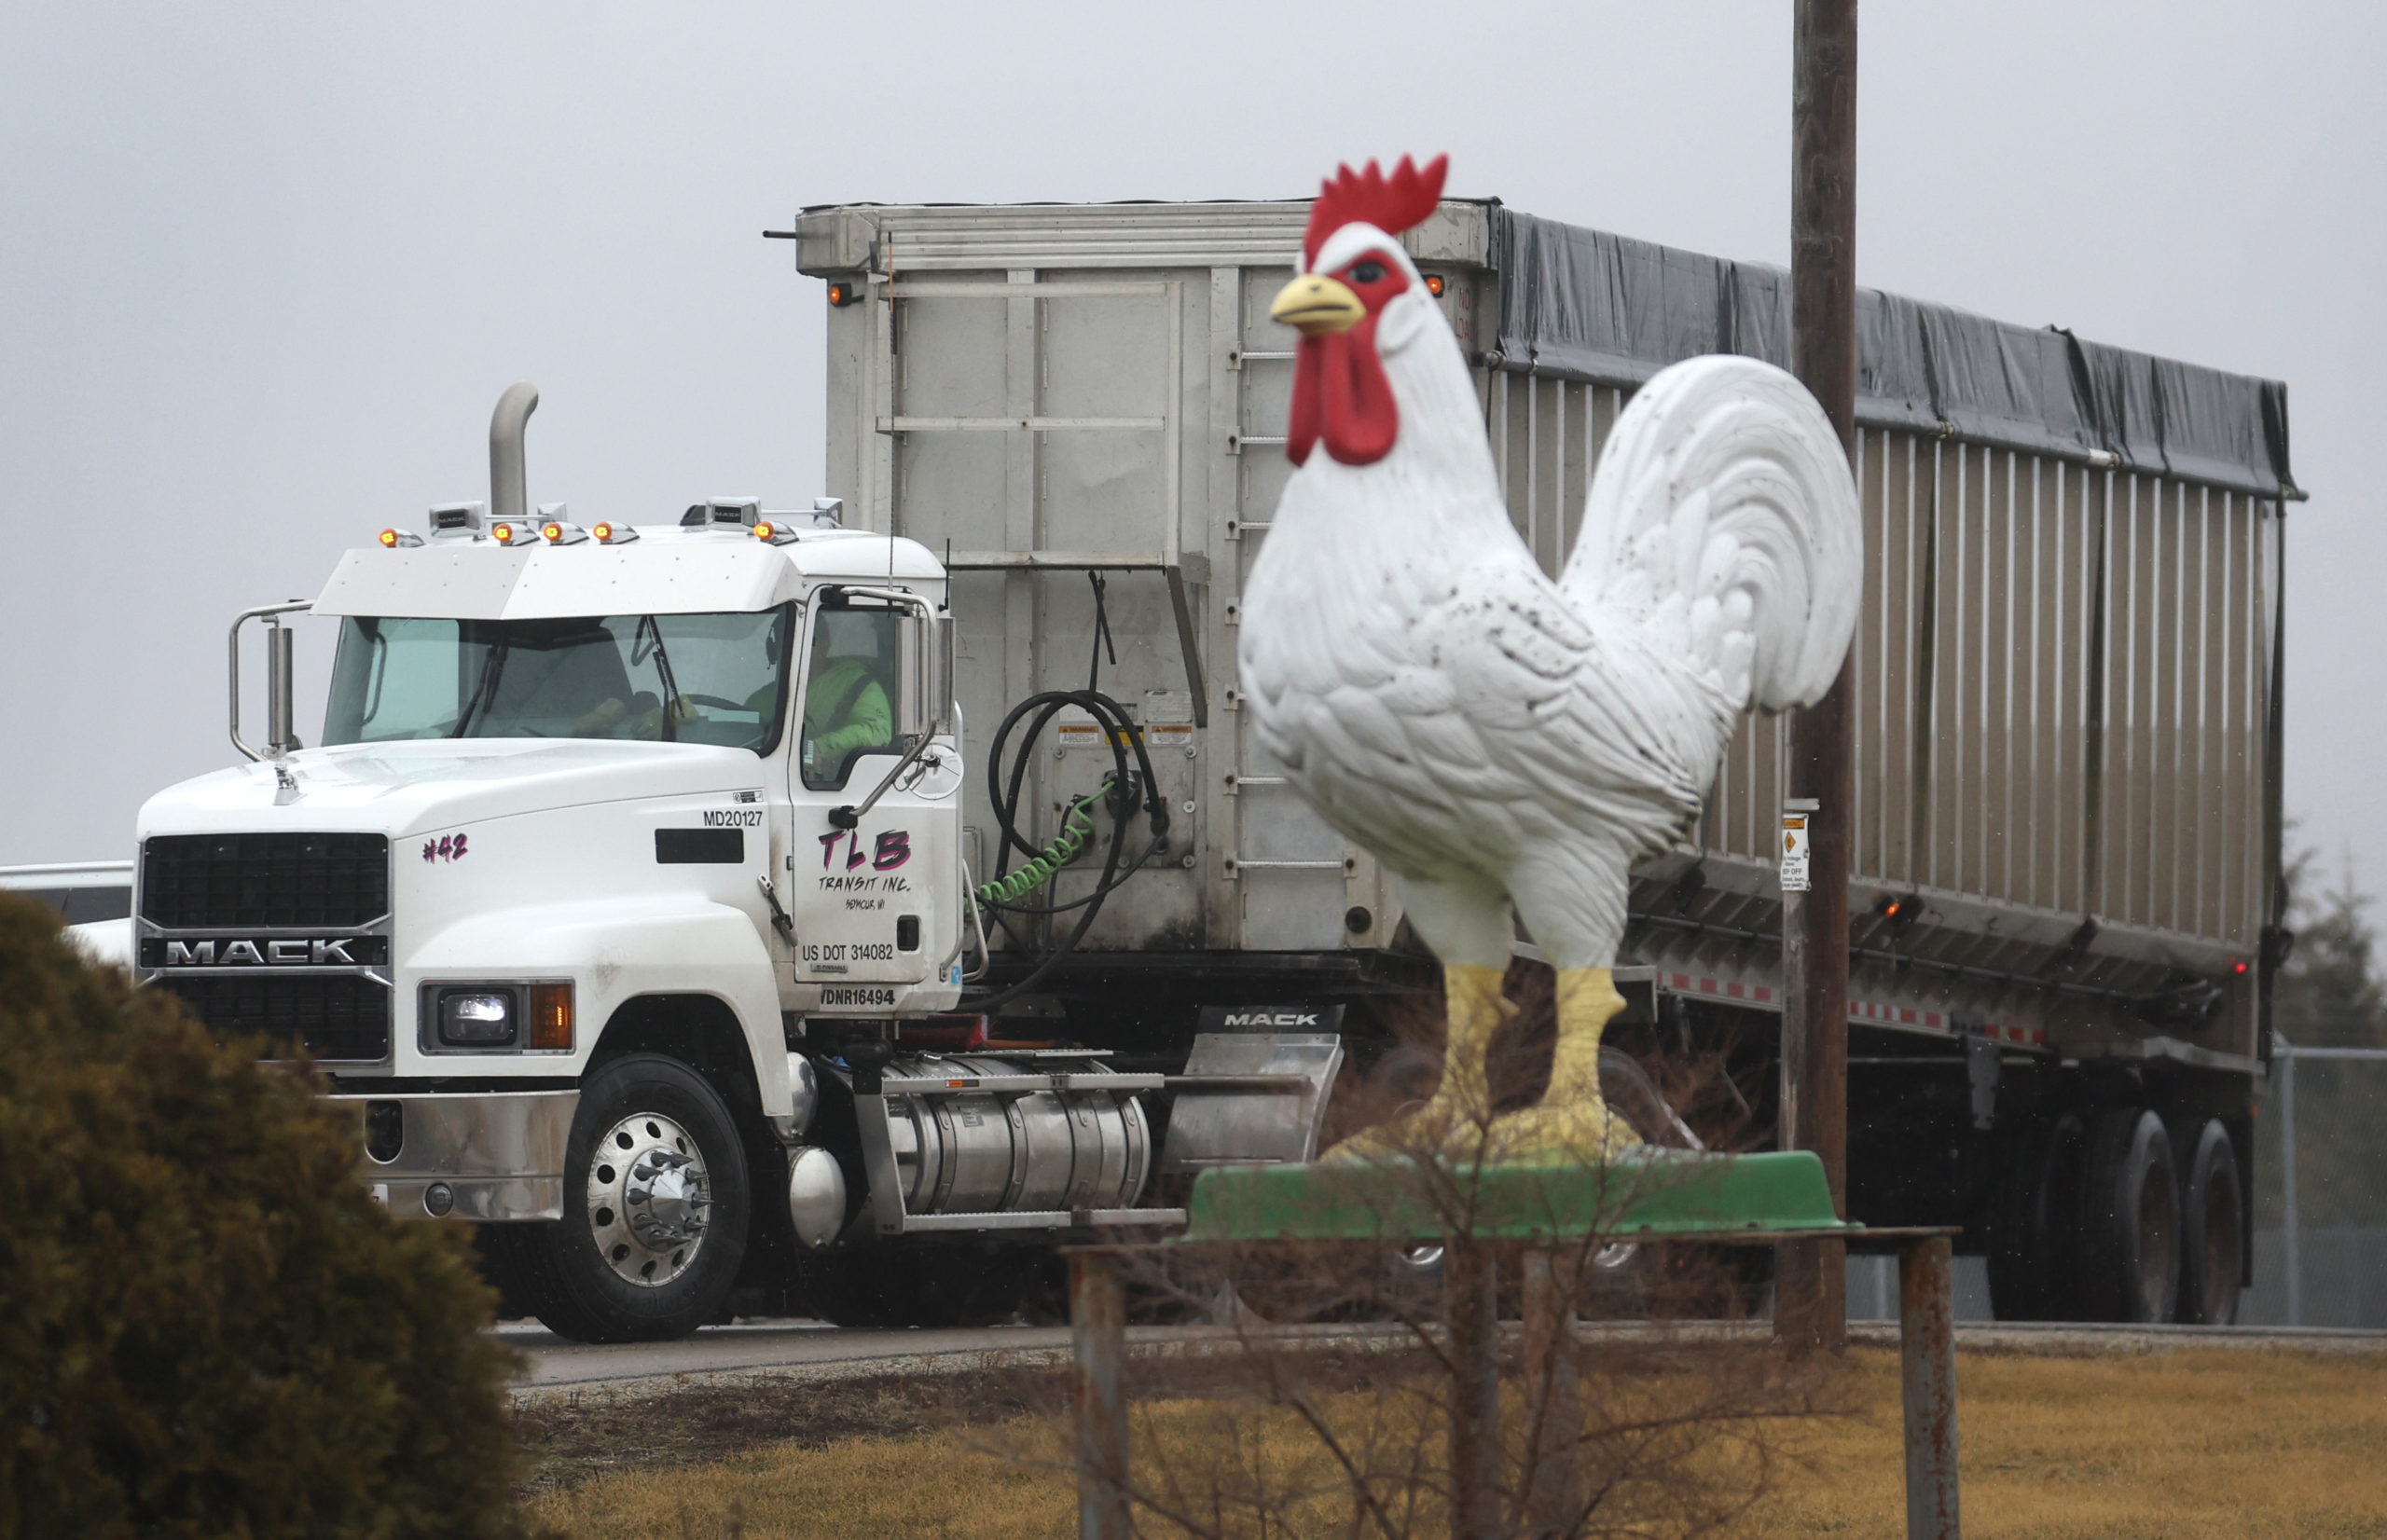 A truck drives out the entrance of the Cold Springs Eggs Farm where the presence of avian influenza was reported to be discovered, forcing the commercial egg producer to destroy nearly 3 million chickens on March 24, 2022 near Palmyra, Wisconsin. (Photo by Scott Olson/Getty Images)